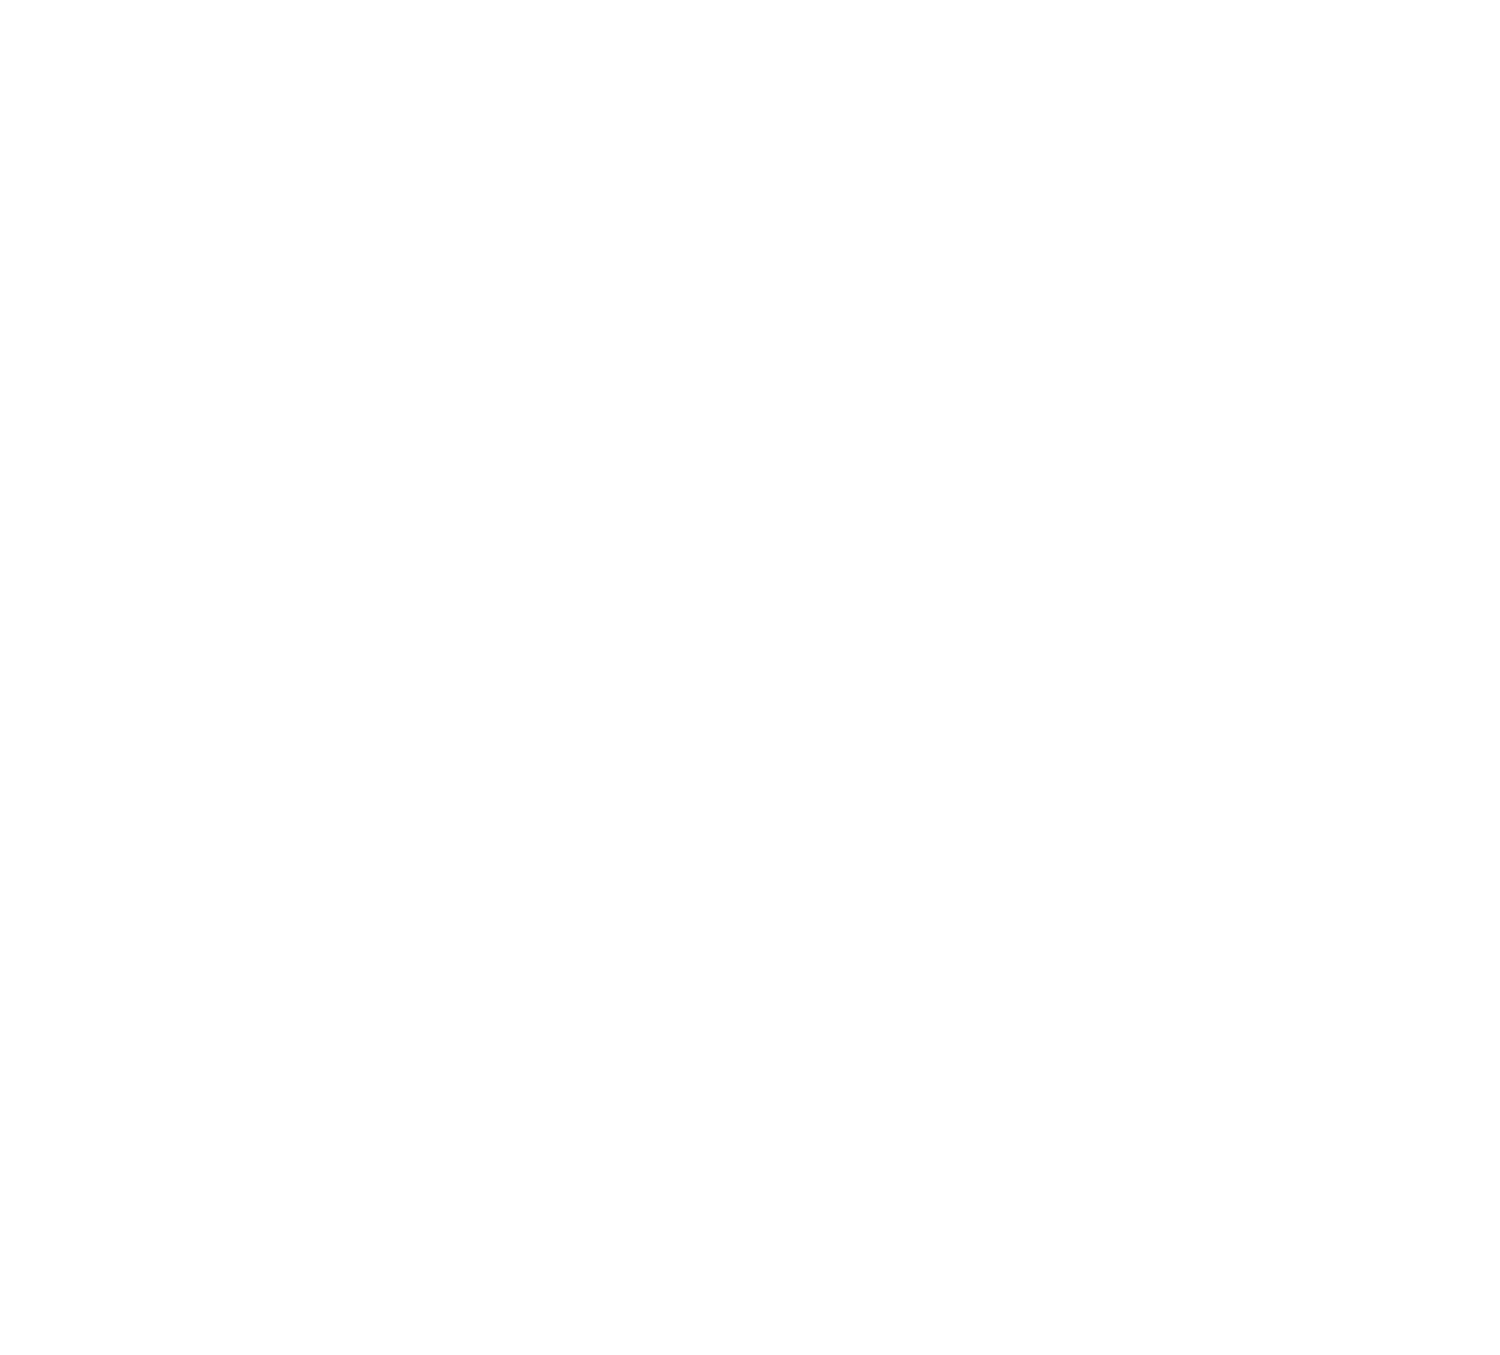 April10 consulting and services